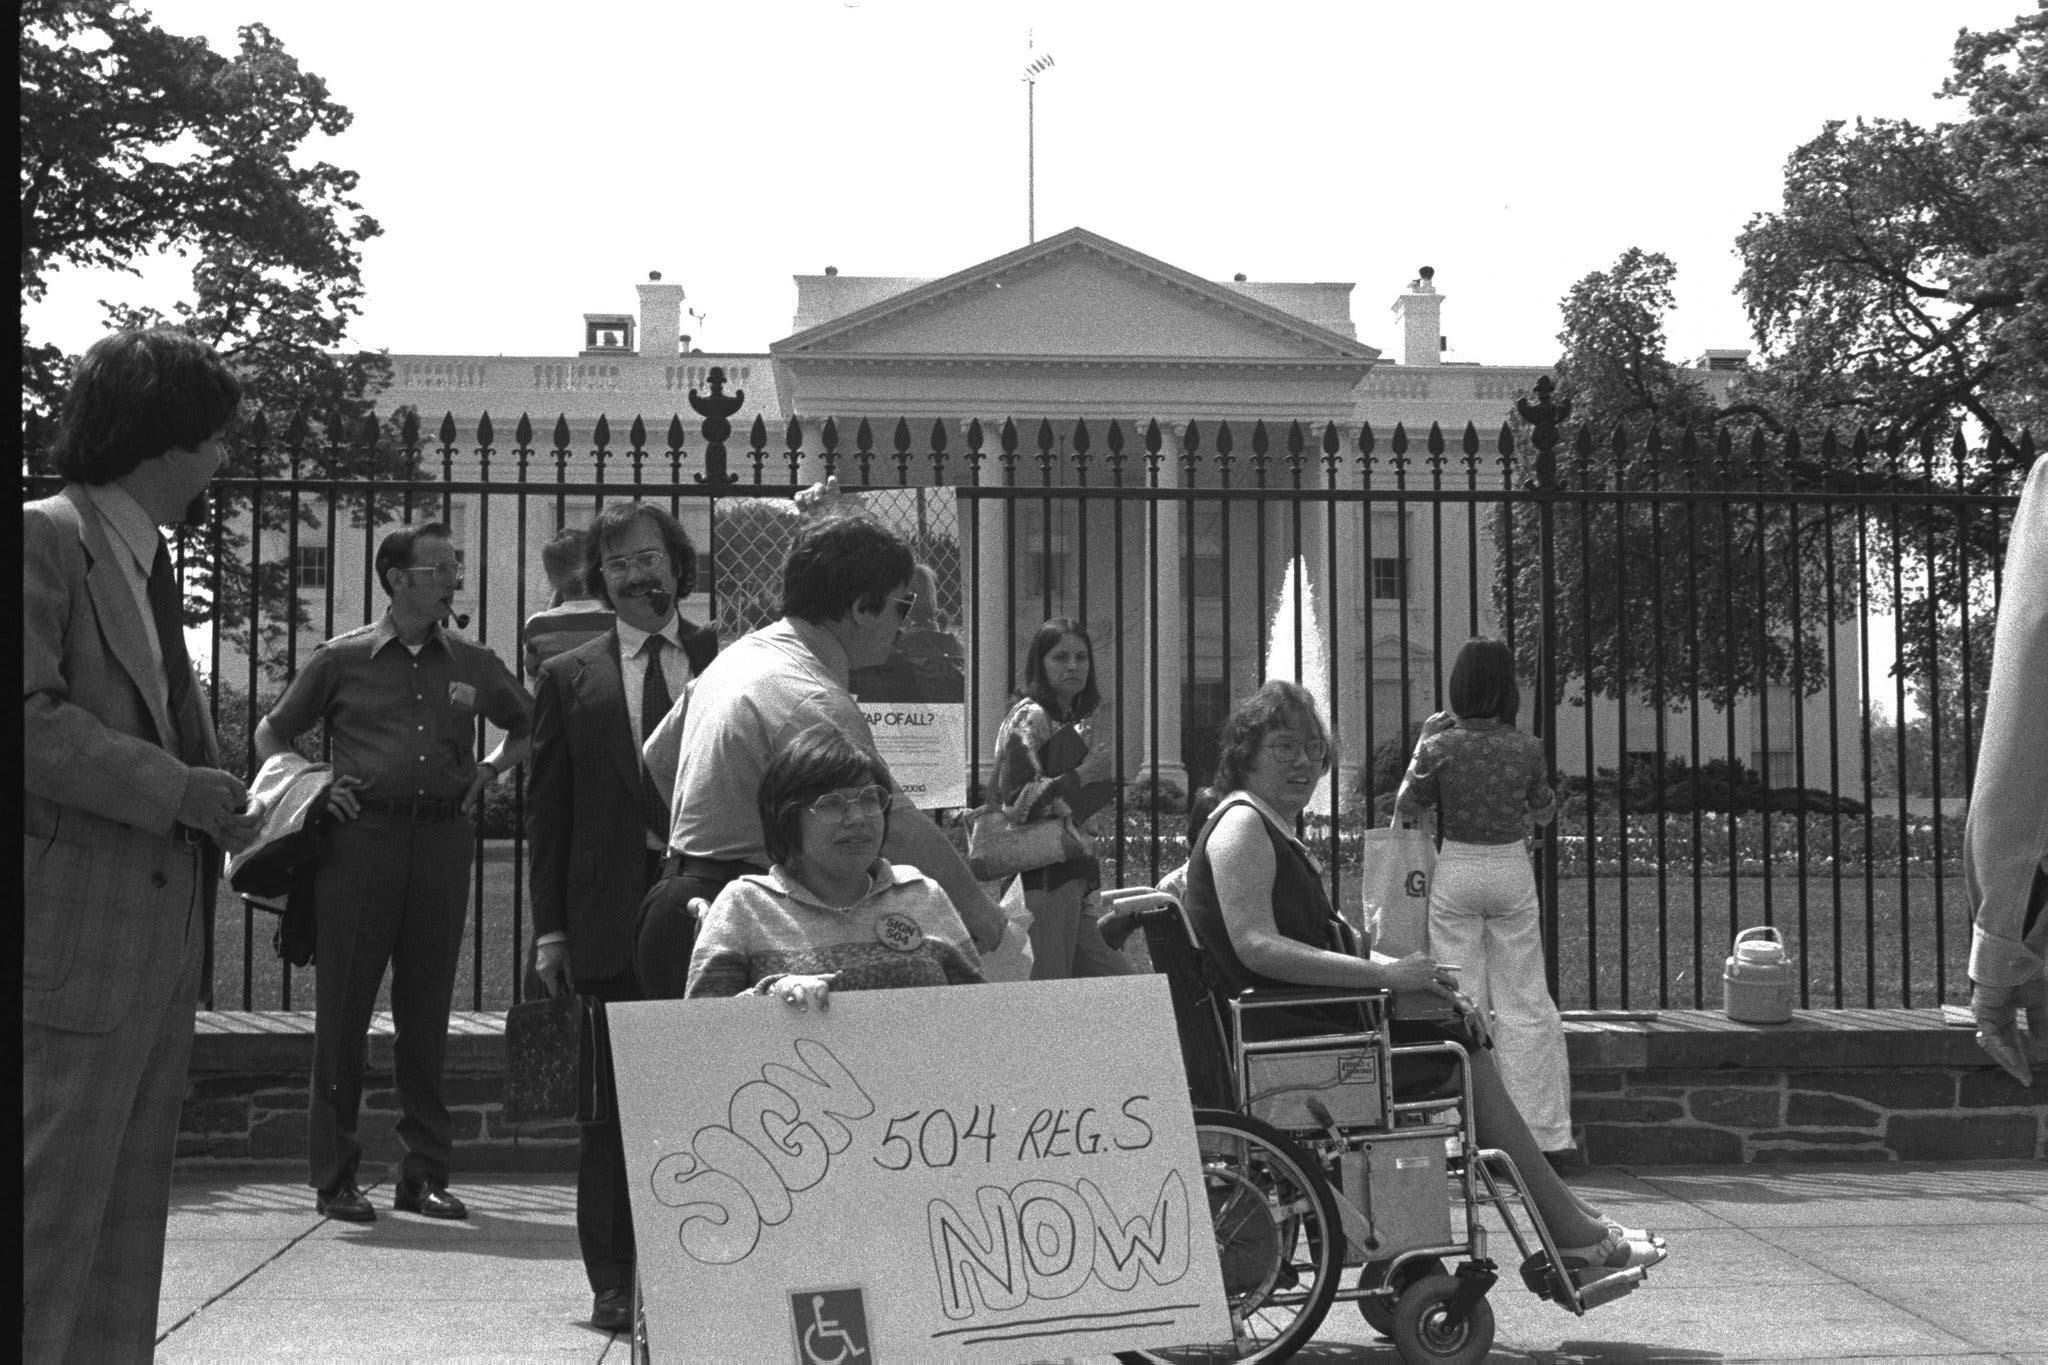 Disability rights advocates protesting in front of the White House.